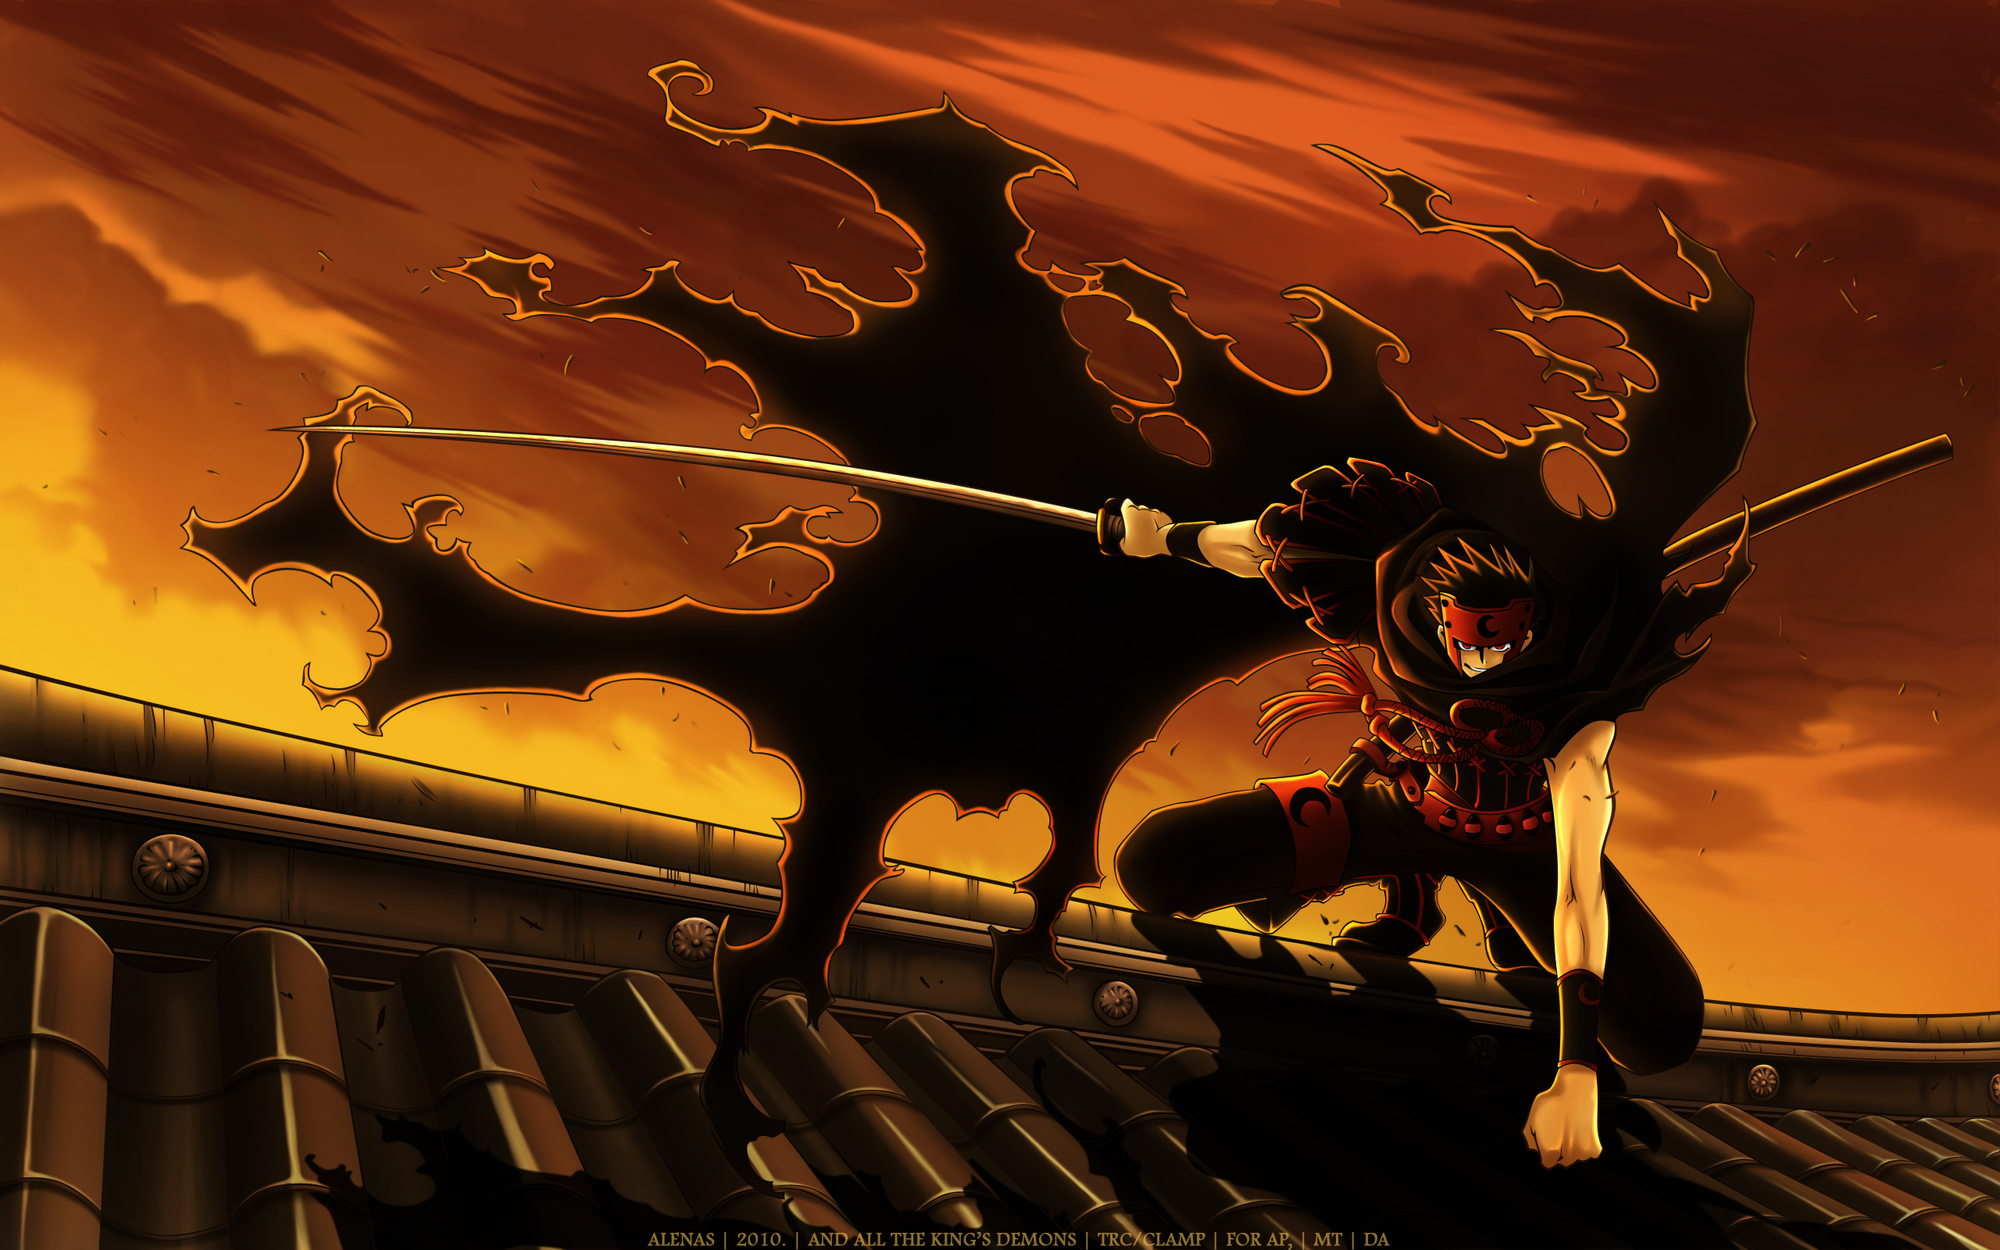 Kurogane from Tsubasa: Reservoir Chronicle wields his sword in this captivating anime desktop wallpaper by Alenas.